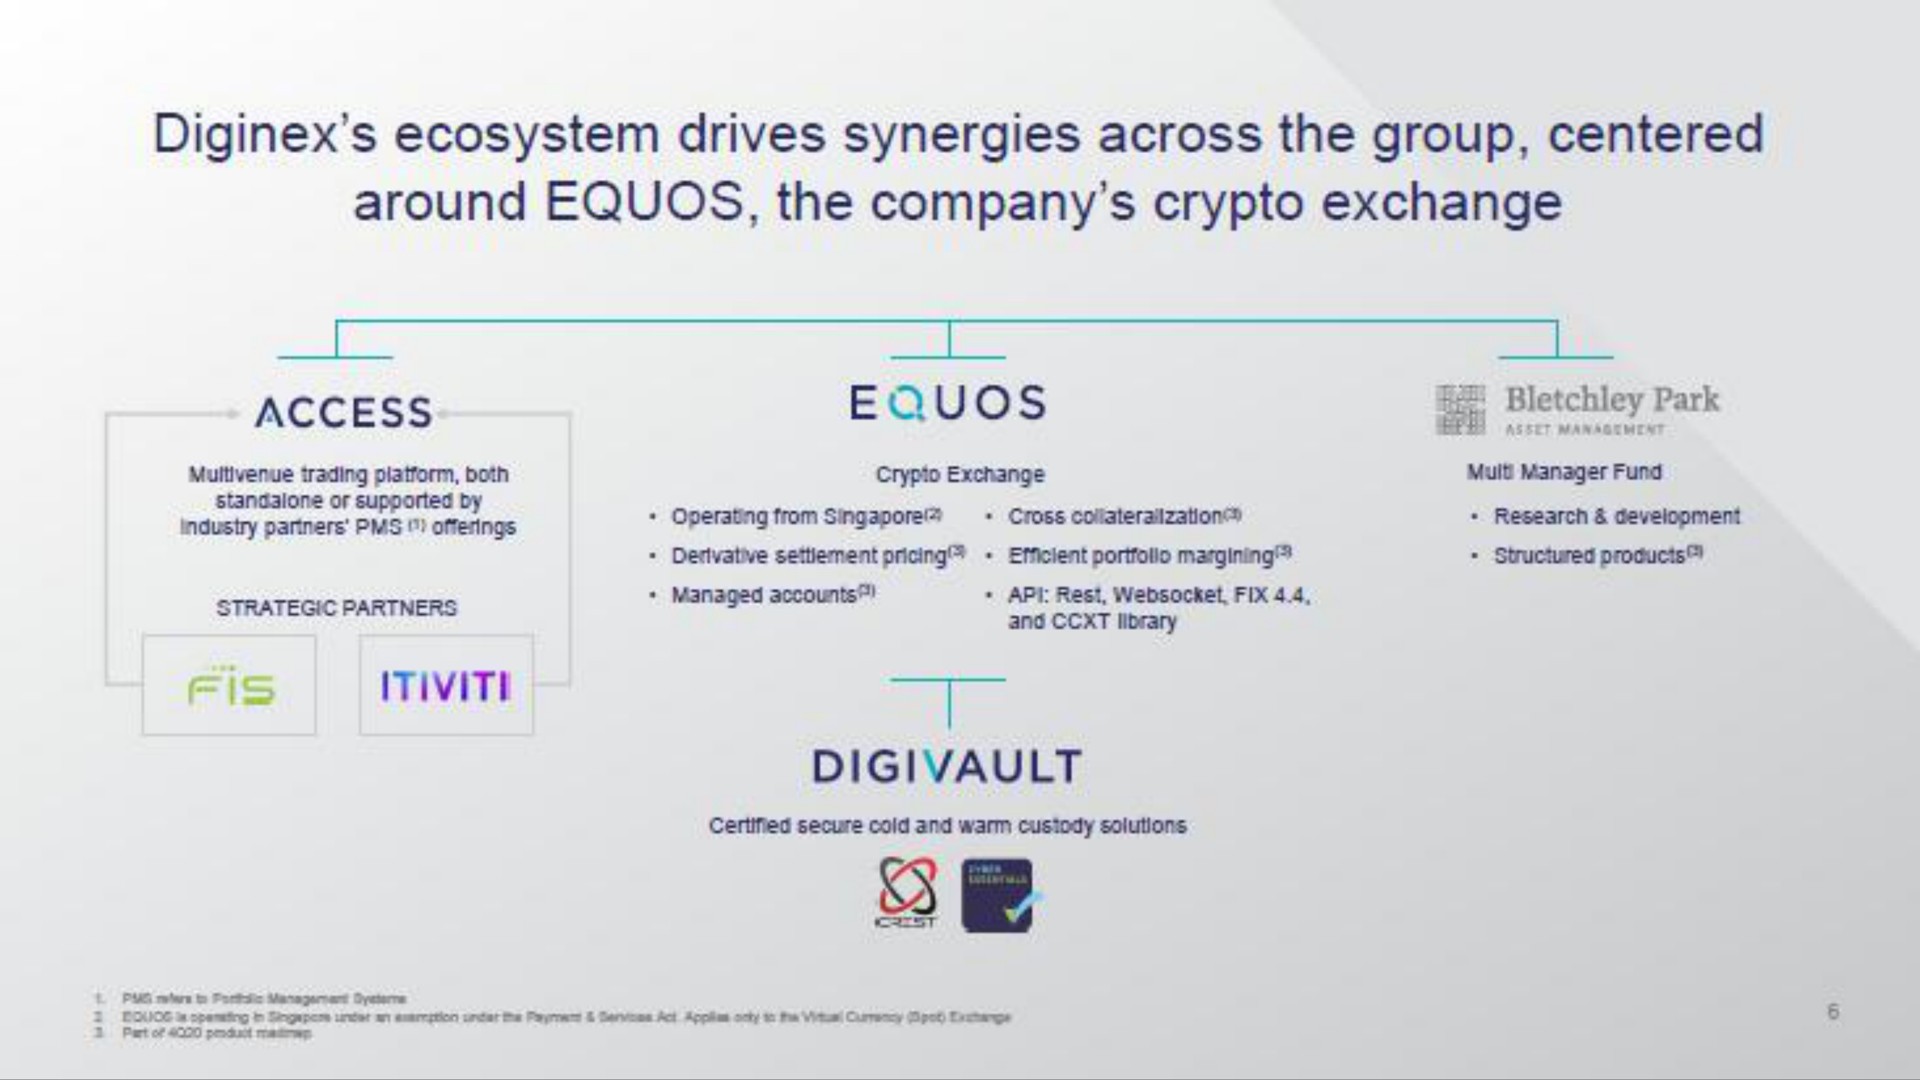 ecosystem drives synergies across the group centered around the company exchange | Diginex